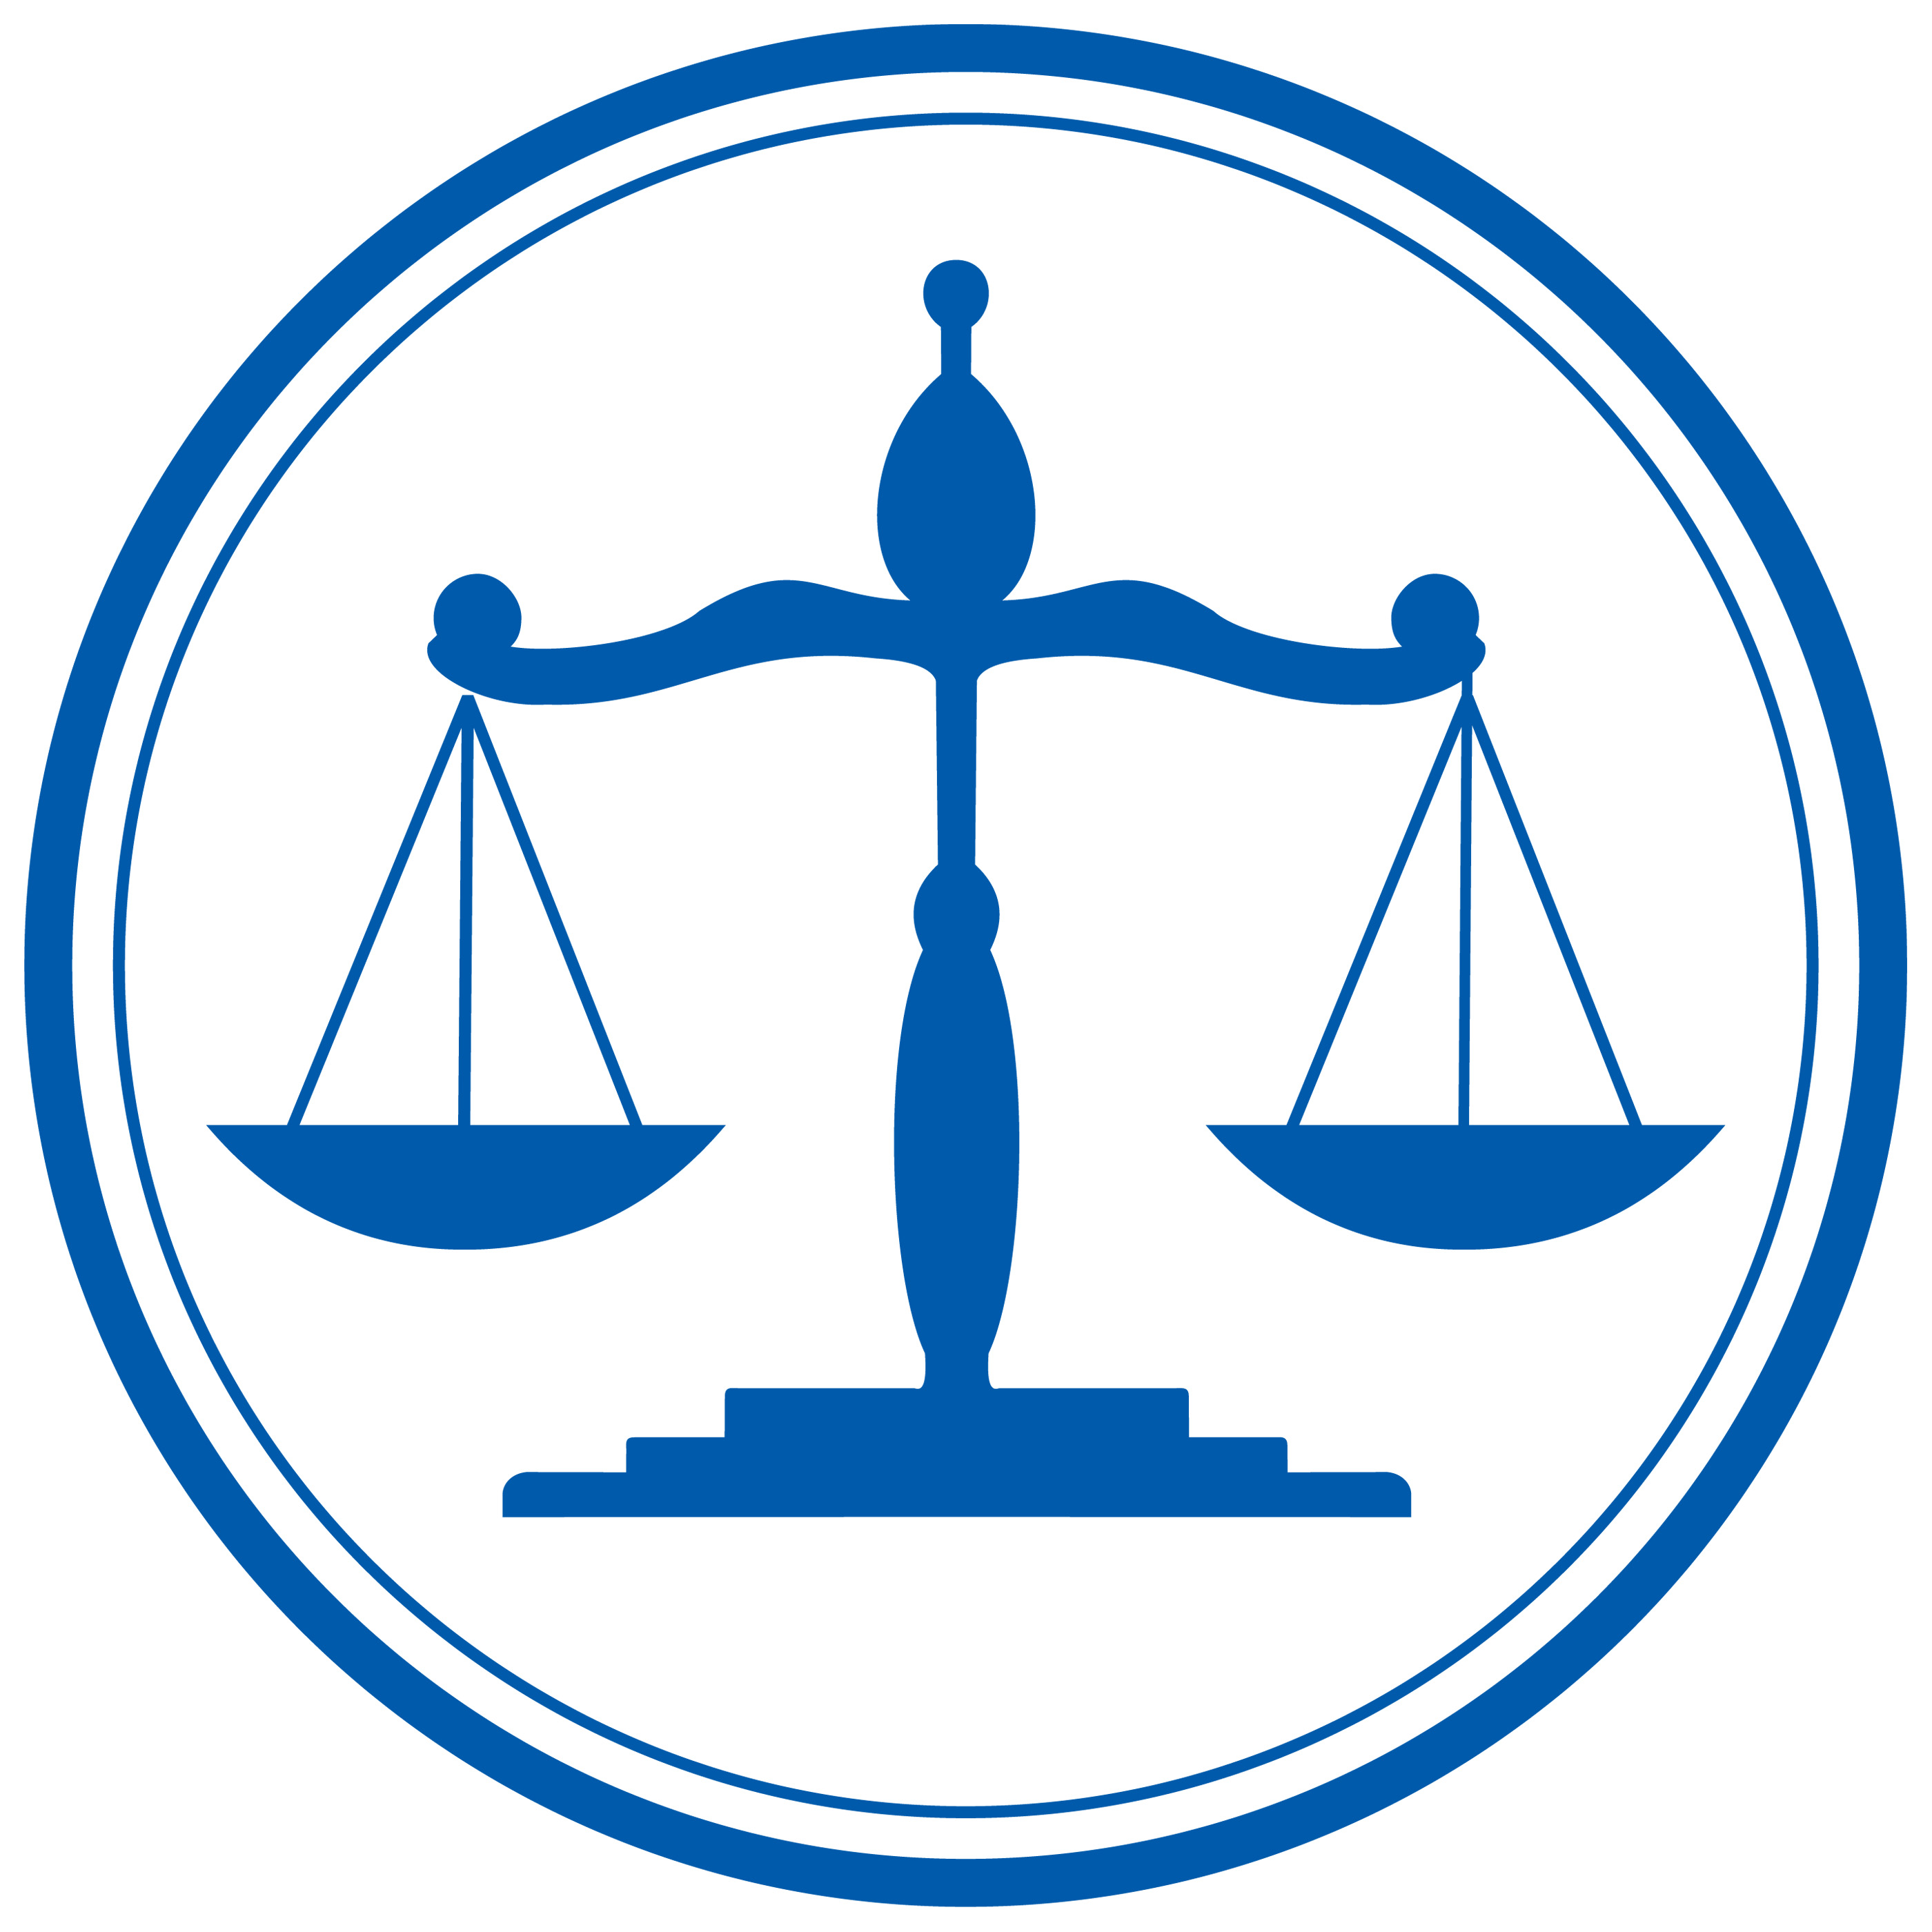 legal scales clipart - photo #22